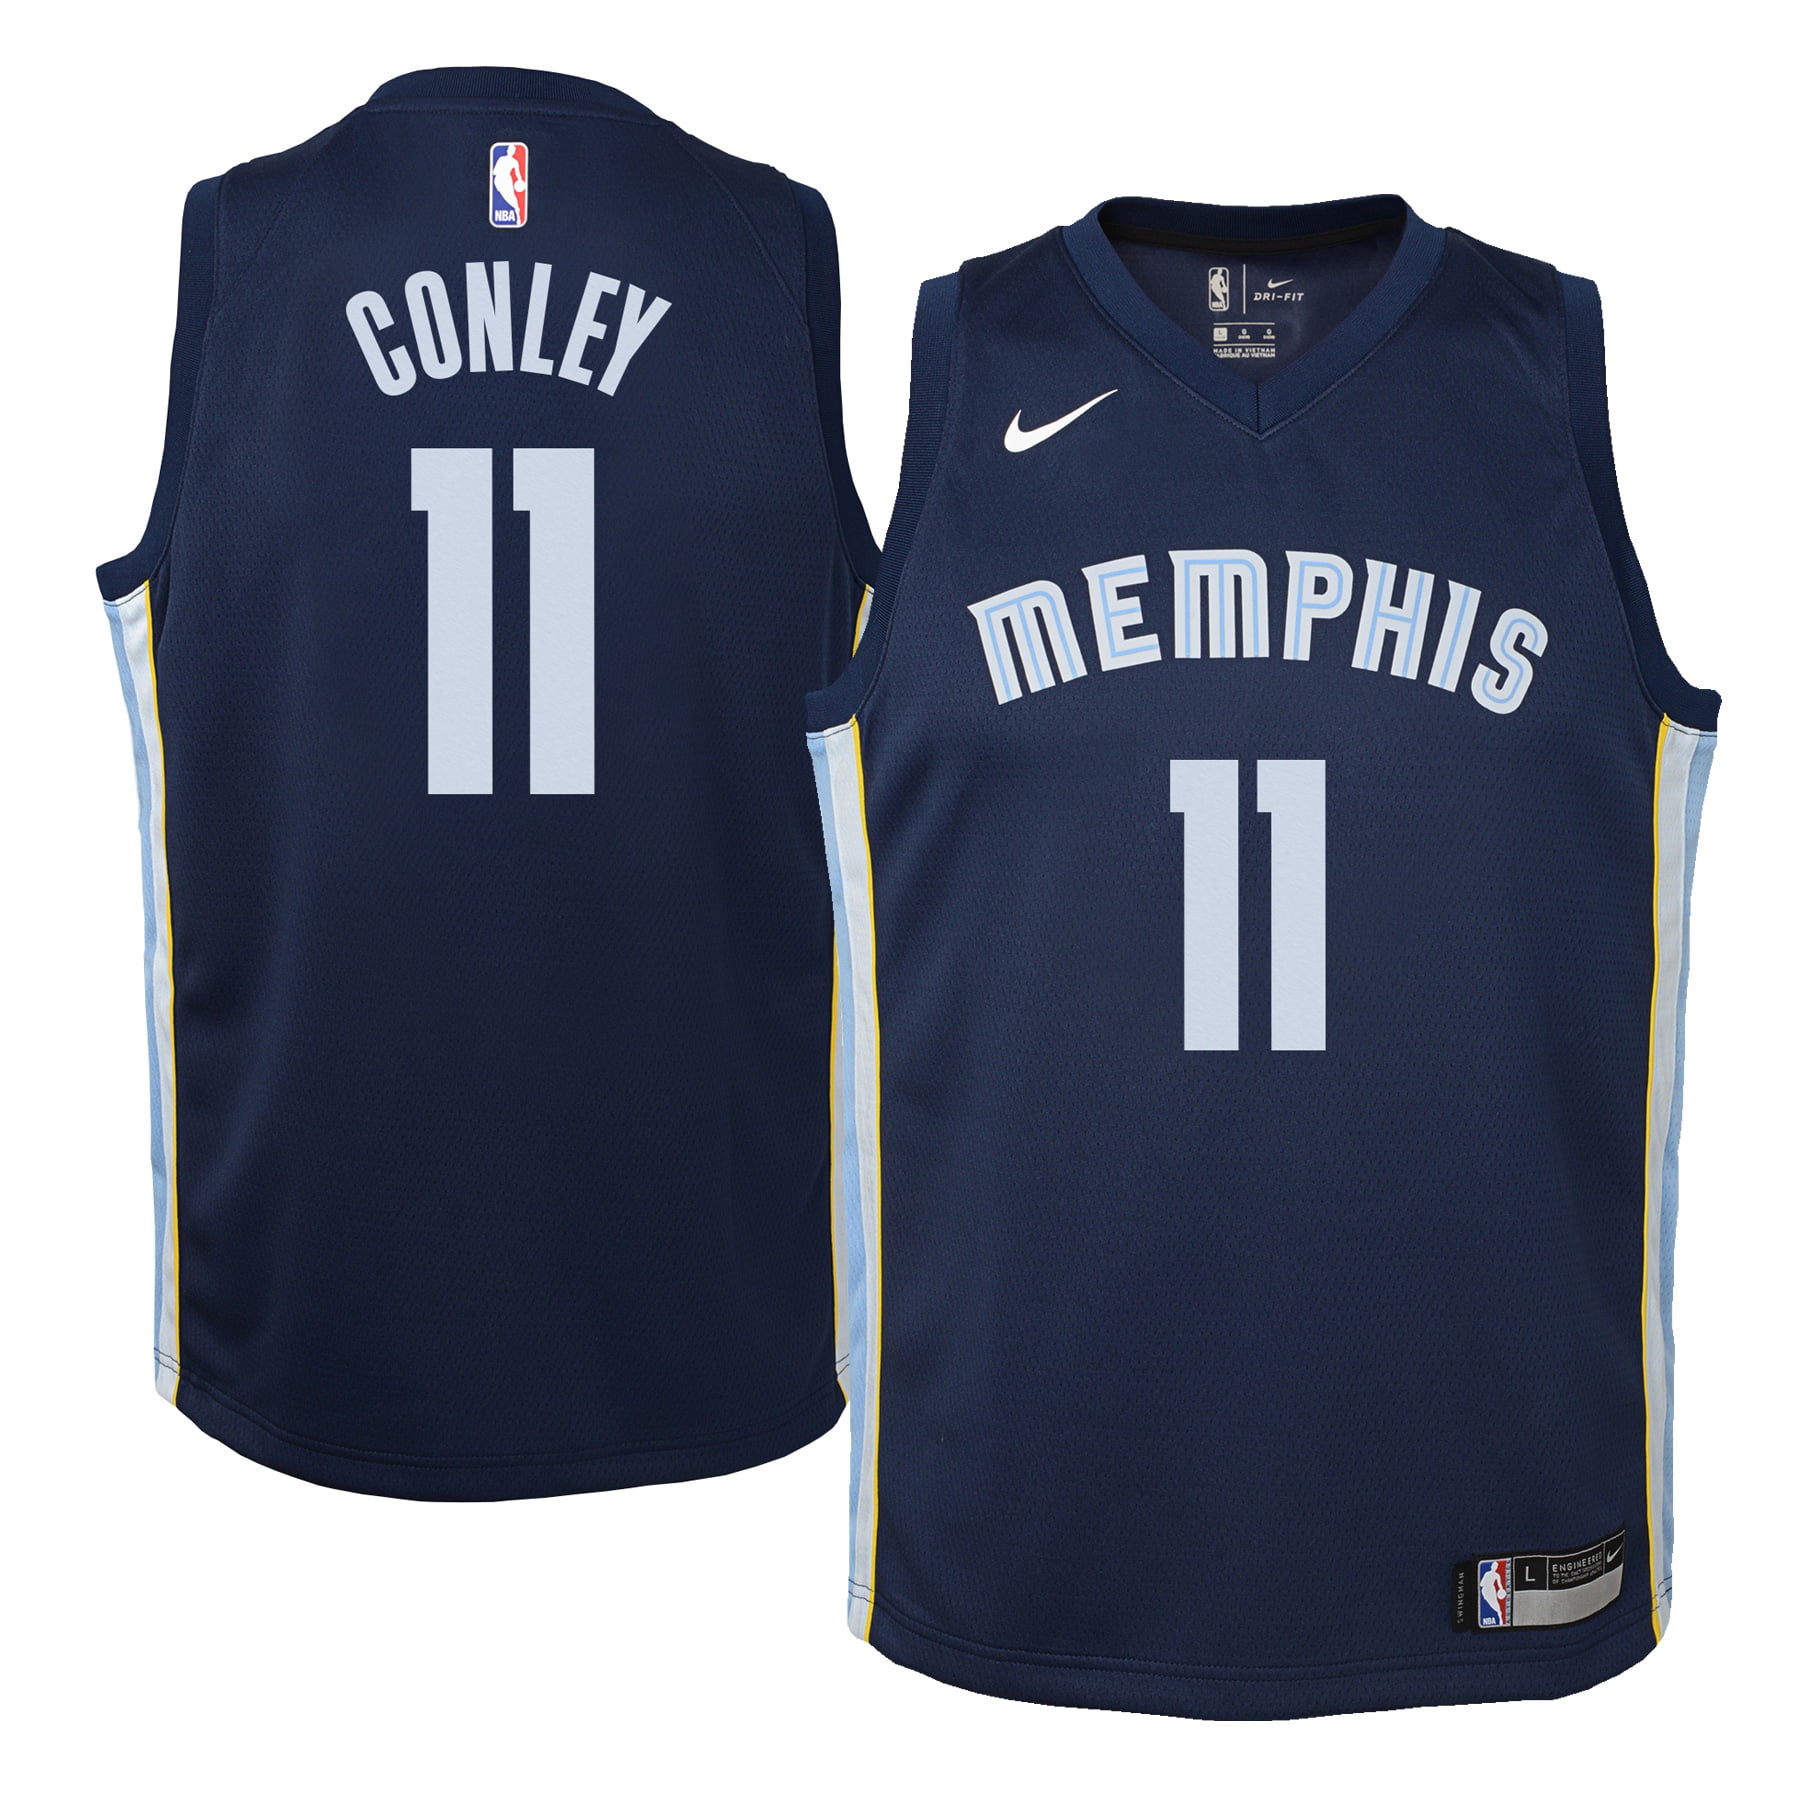 mike conley jersey